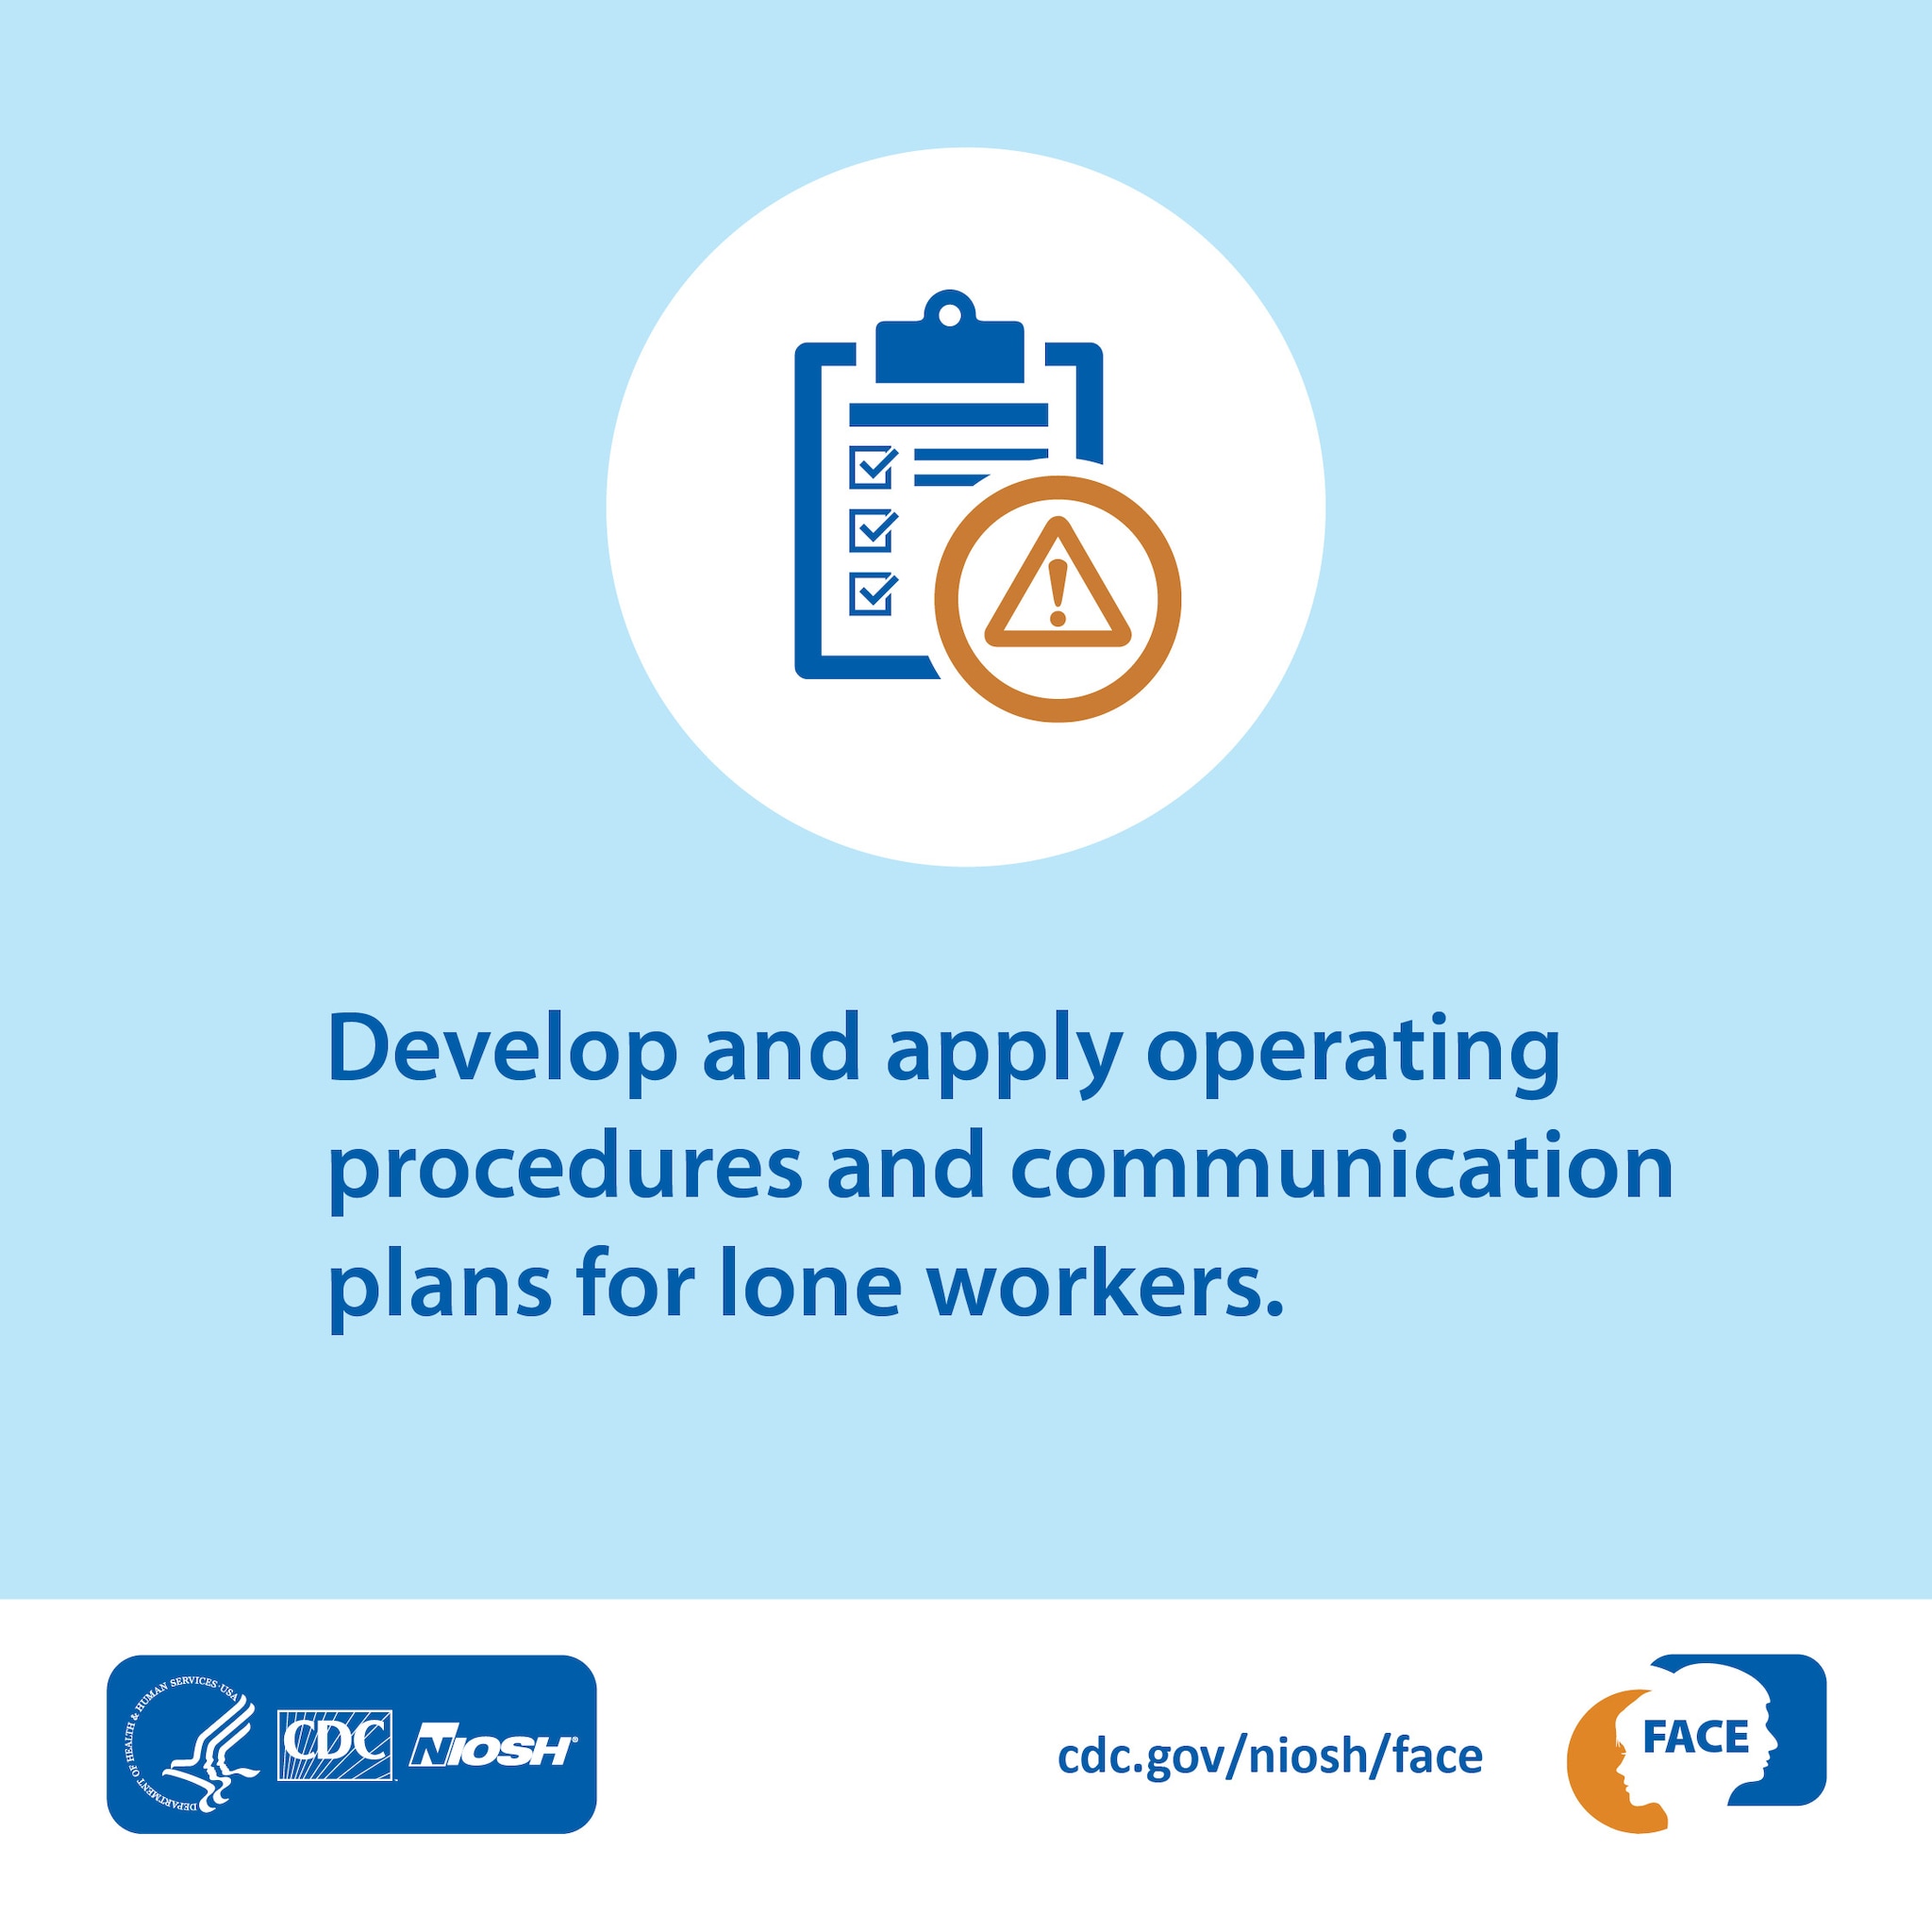 Develop and apply operating procedures and communication plans for lone workers.